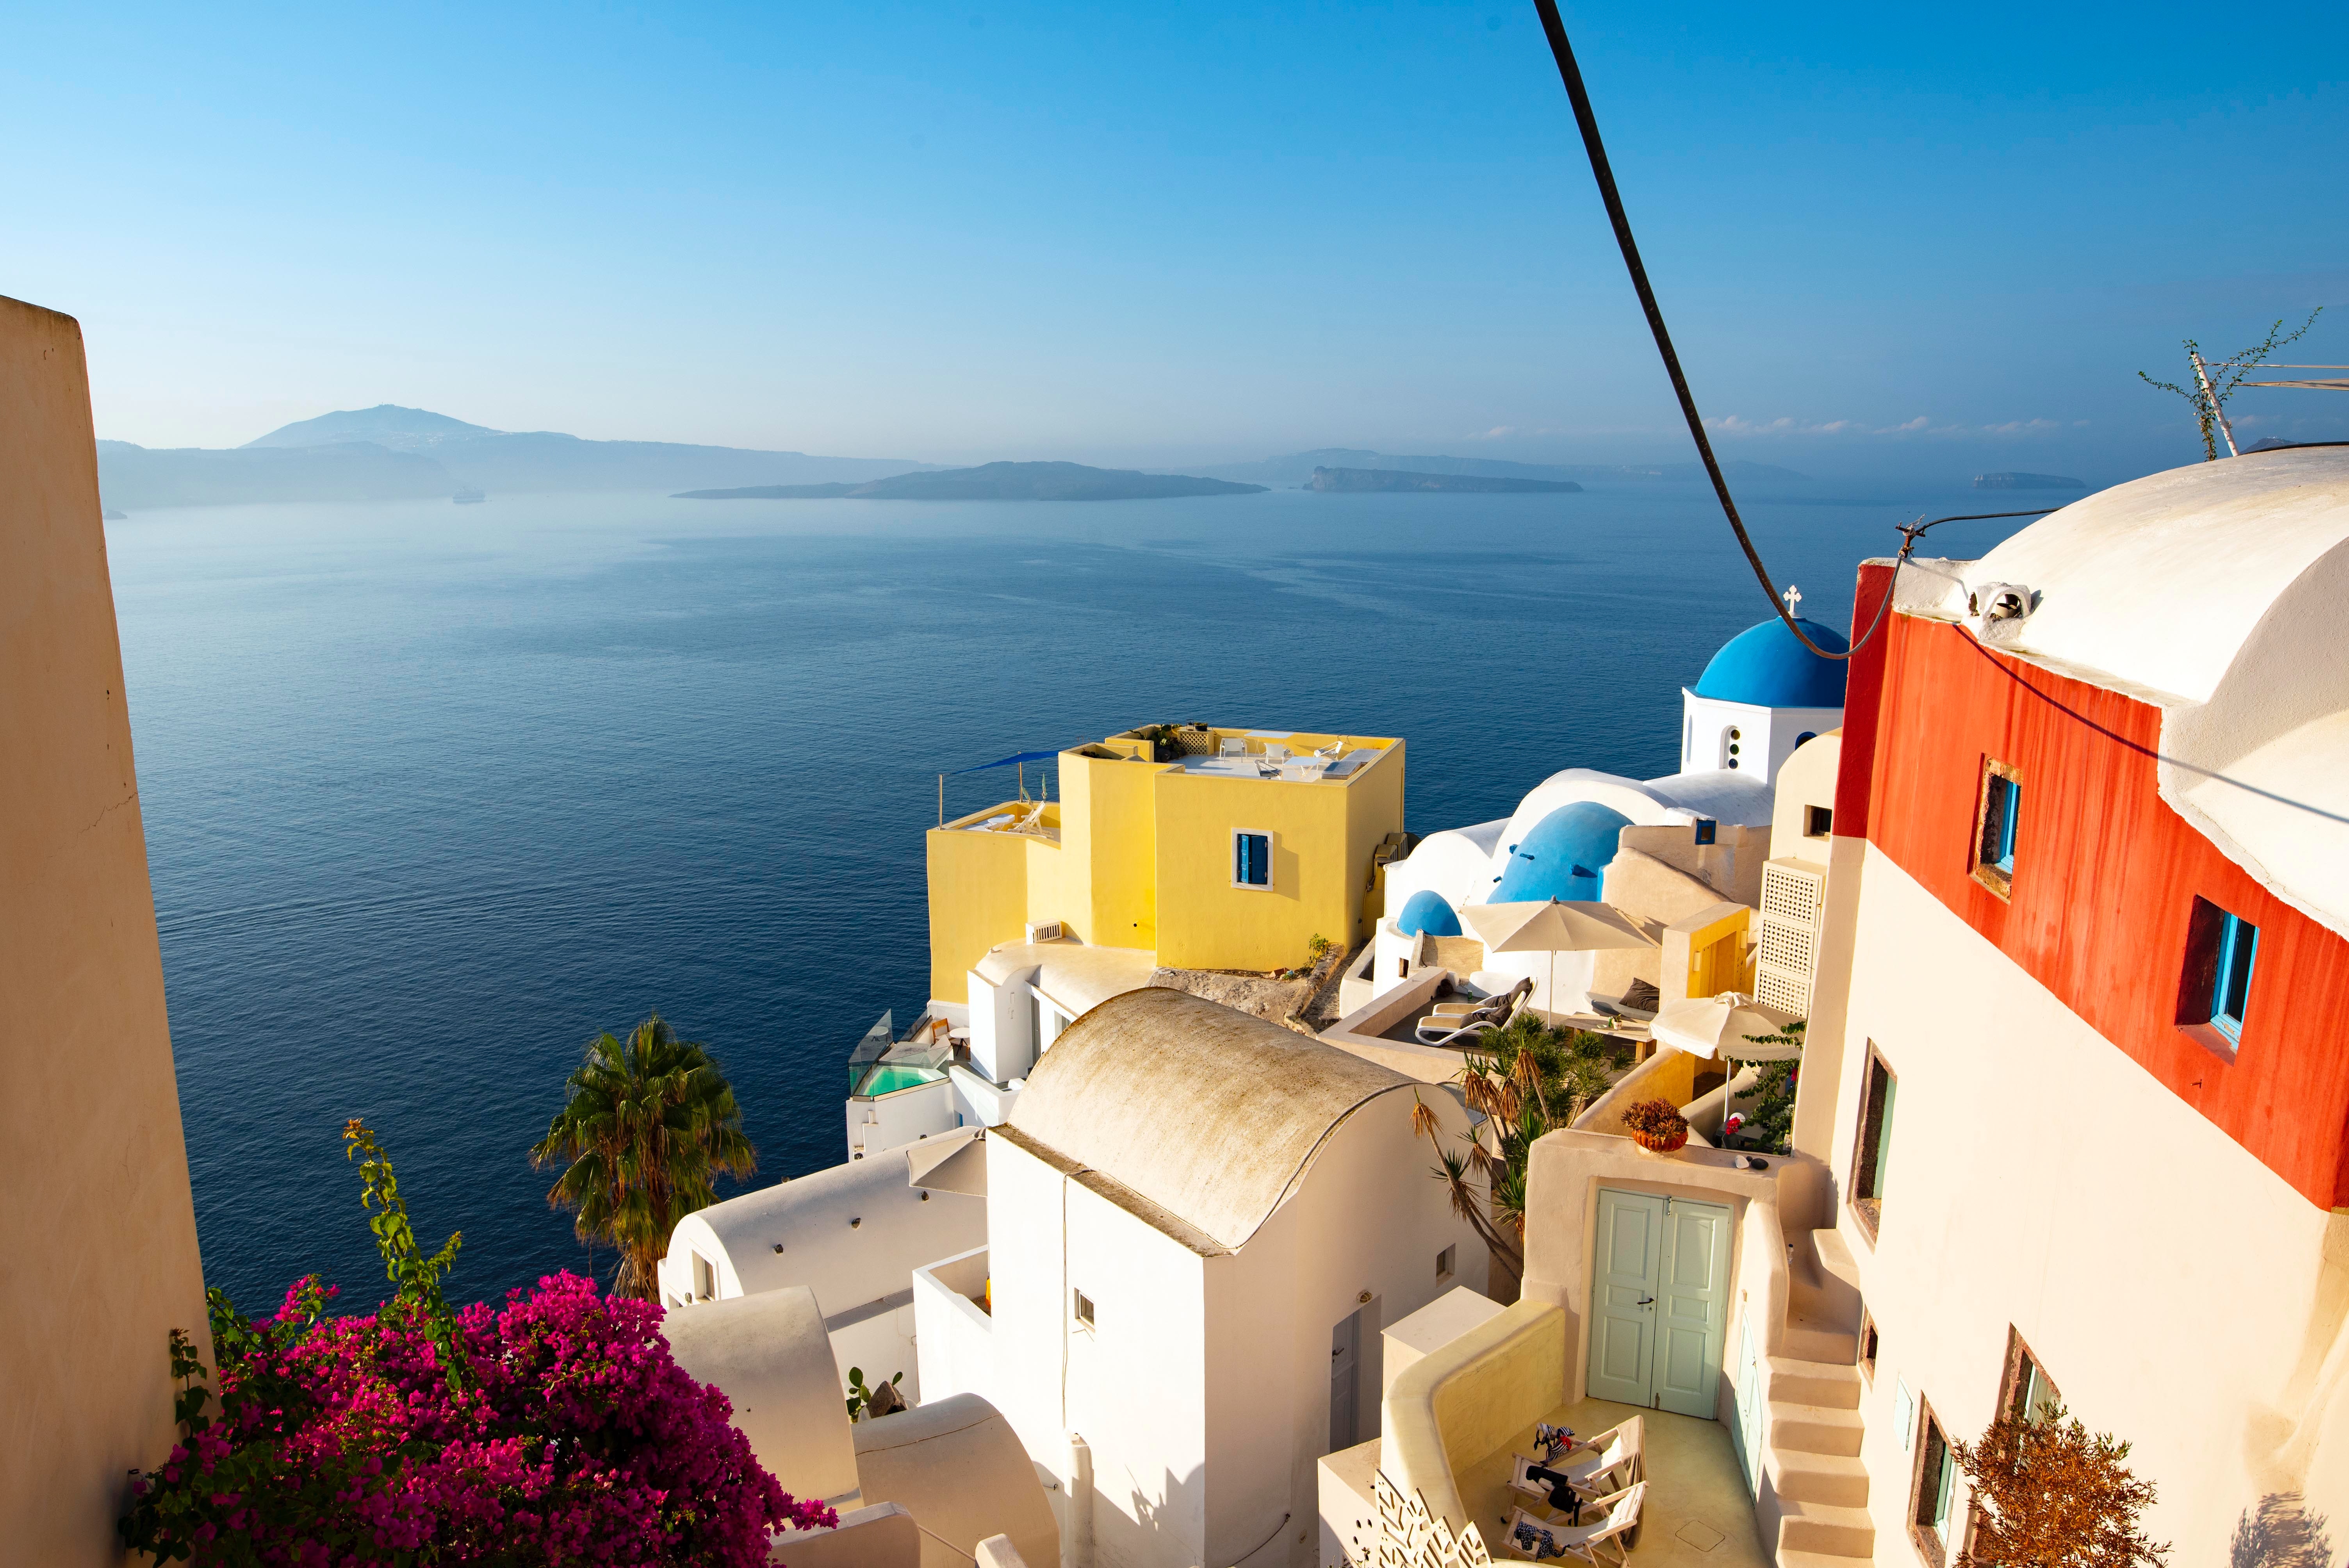 An Expert Traveler Dishes On How To See Greece On A Budget